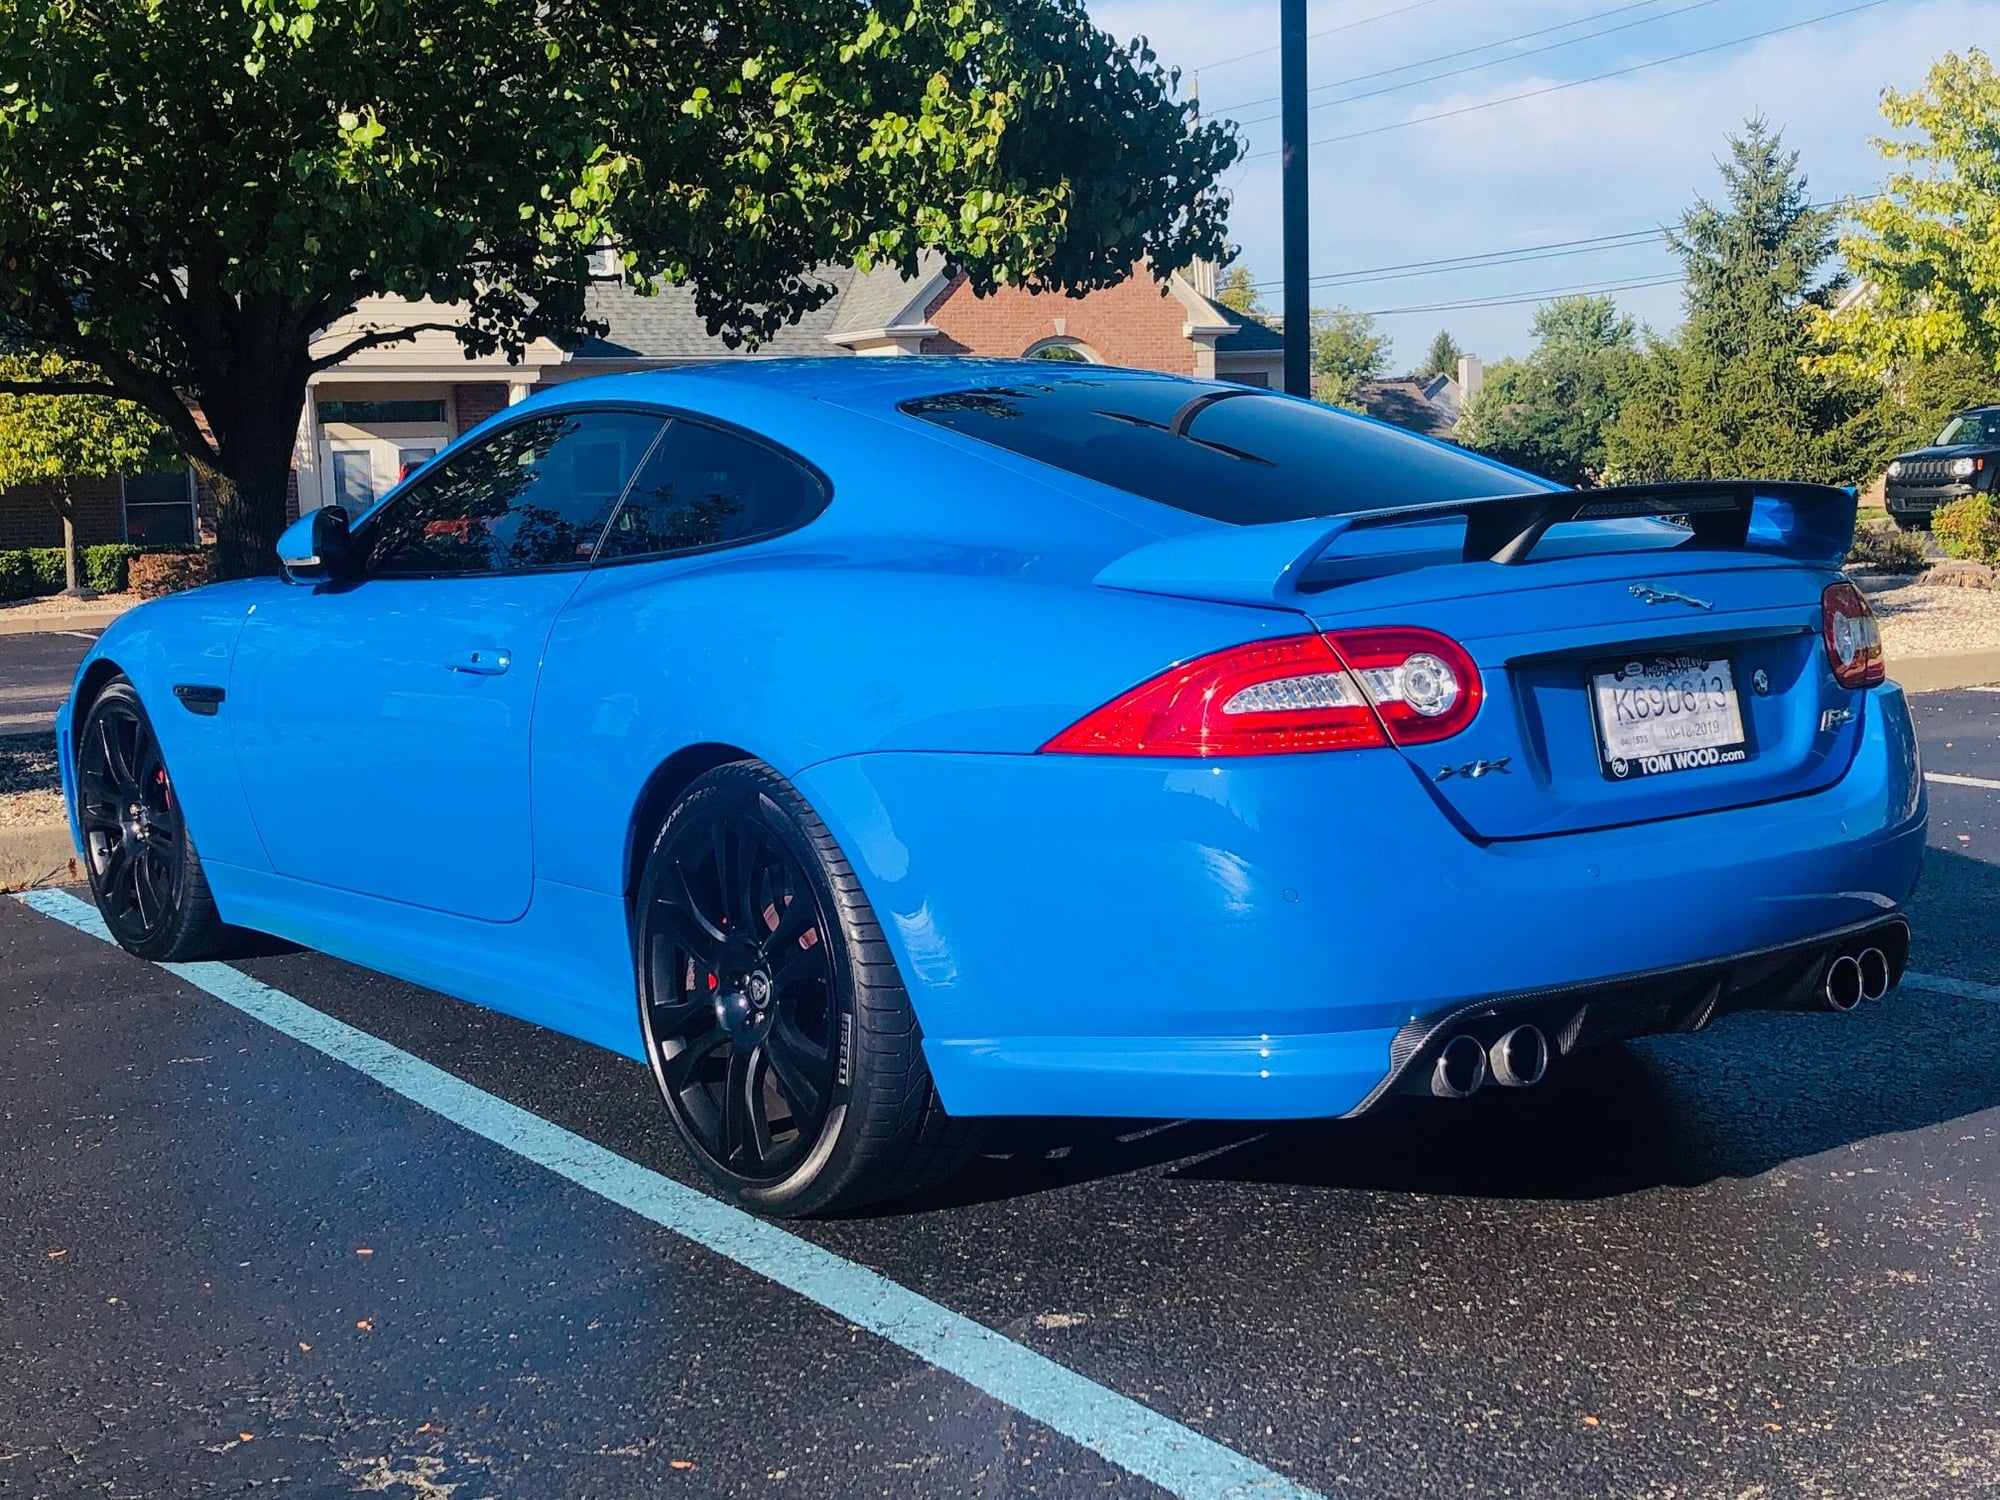 2013 Jaguar XKR-S - 2013 XKR-S factory 20" Wheels and tires (3) - Wheels and Tires/Axles - $500 - Fishers, IN 46037, United States